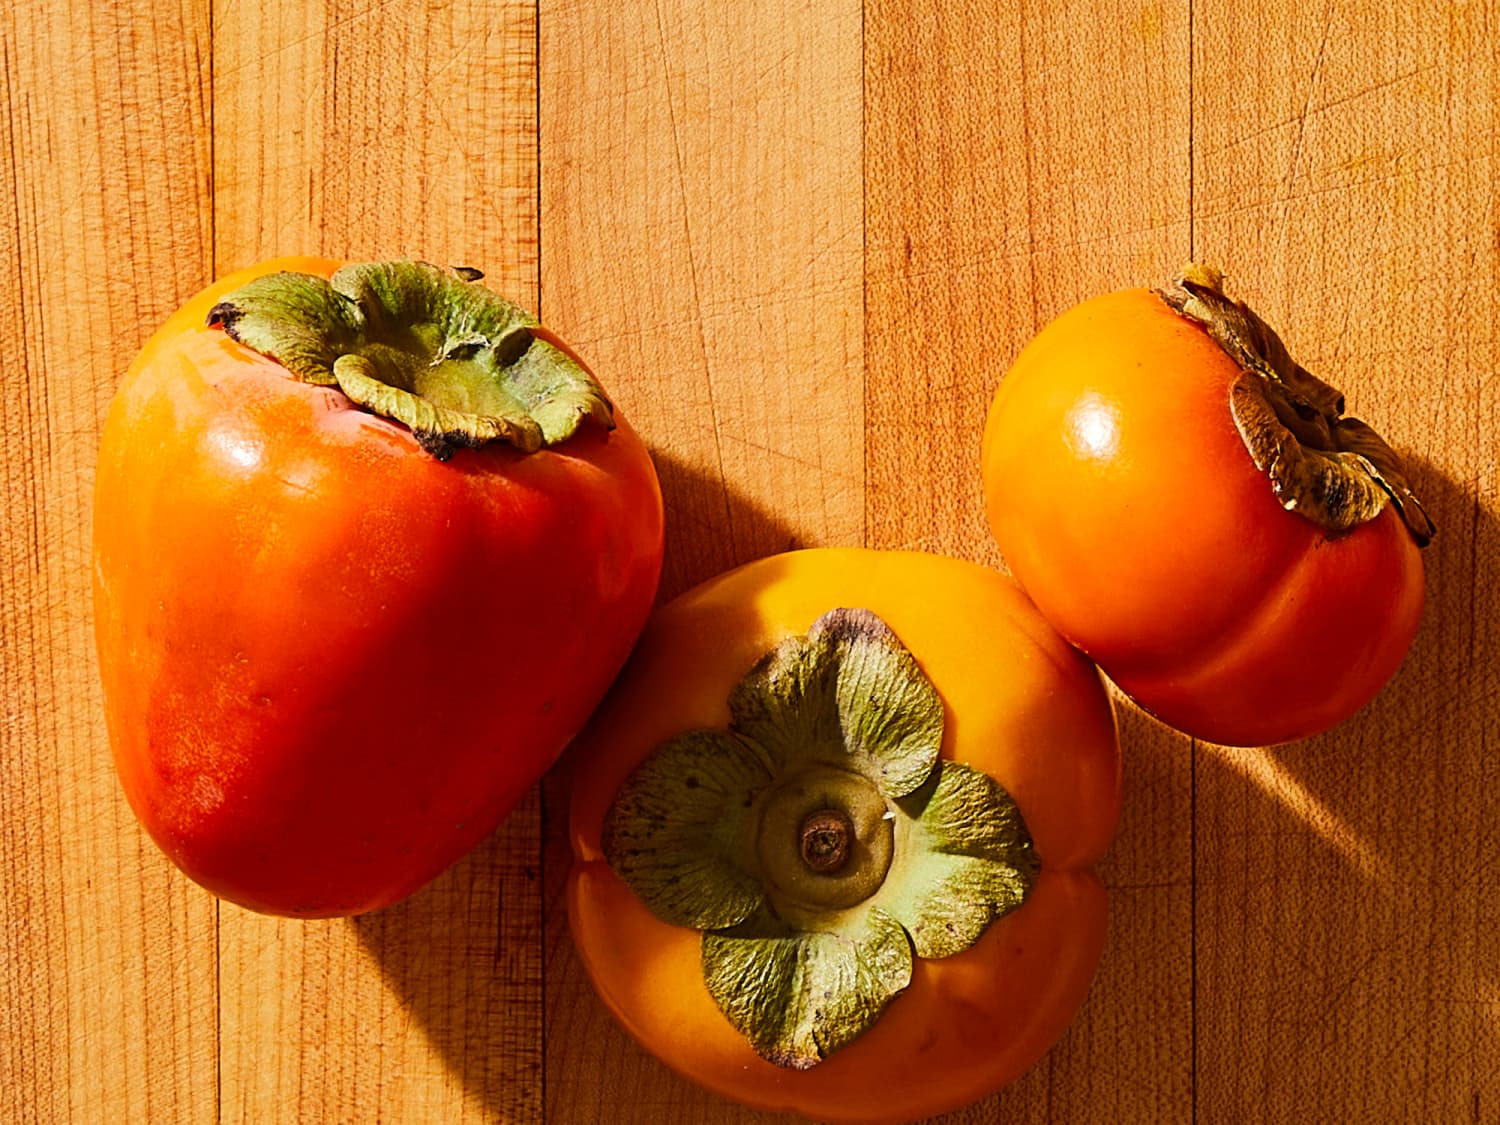 Explore Growing, Making and Tasting Persimmon Fruit with Tips from Experts